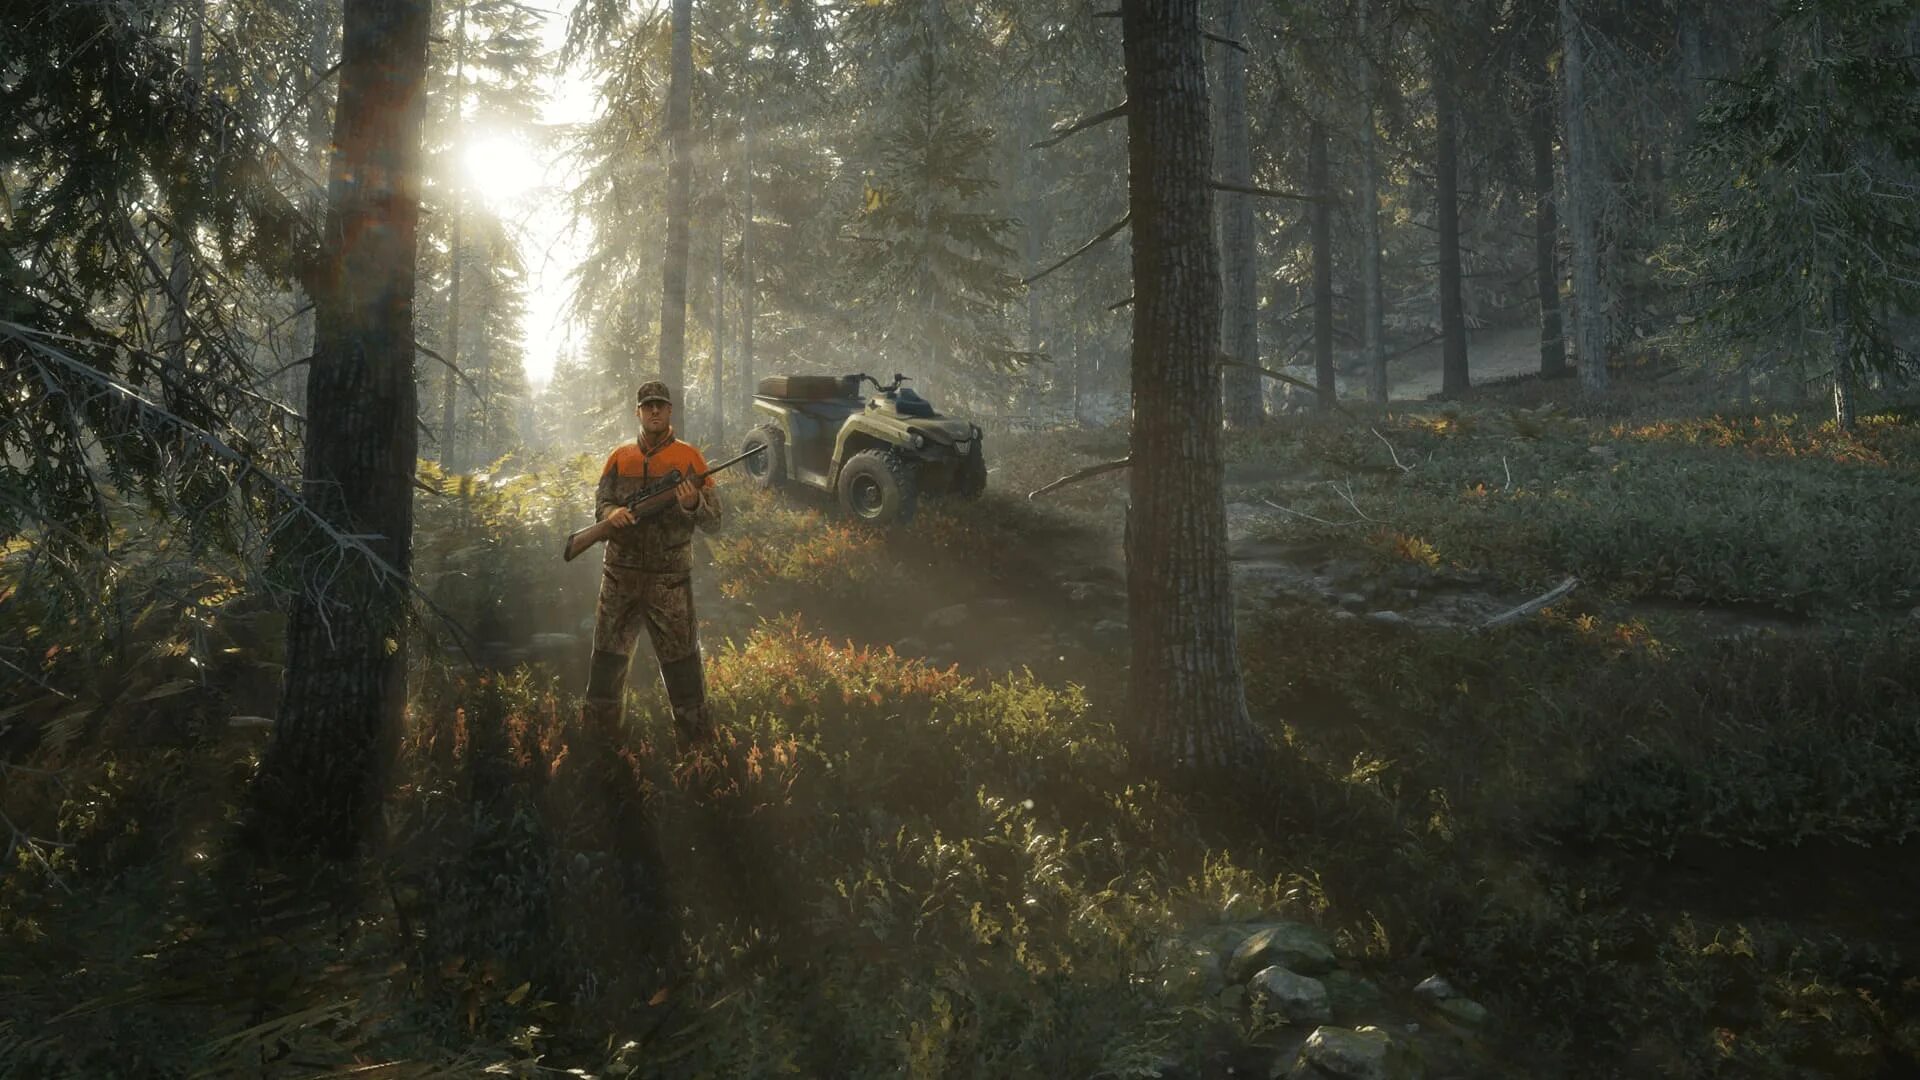 Call of the Wild игра. THEHUNTER: Call of the Wild. Hunt Call of the Wild. Игра охота the Hunter Call of the Wild. Call of the wild epic games